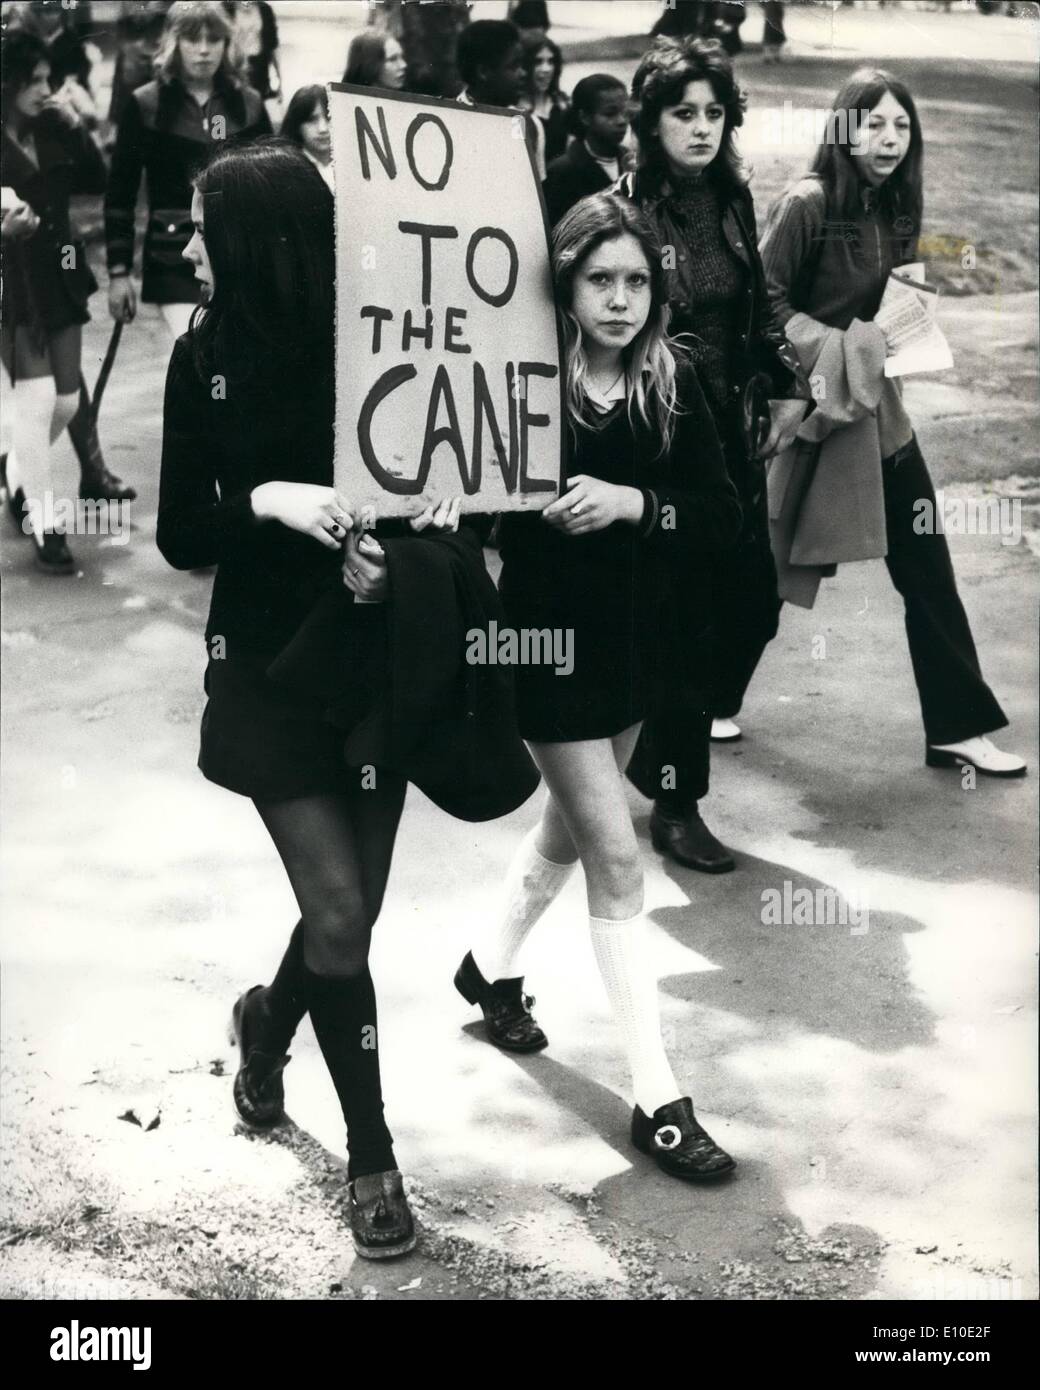 May 05, 1972 - Schoolchildren on a one day strike take part in Protest Demonstration outside County Hall.: The power-pupil schoolchildren called for a one-day strike today from about 70 London schools. The militants are demanding abolition of school uniform - a ban on caning and detention. Many of the schoolchildren gathered outside County hall Photo shows Two schoolchildren carrying a banner bearing the words ''No to the Cane'' in Hyde Park today. Stock Photo